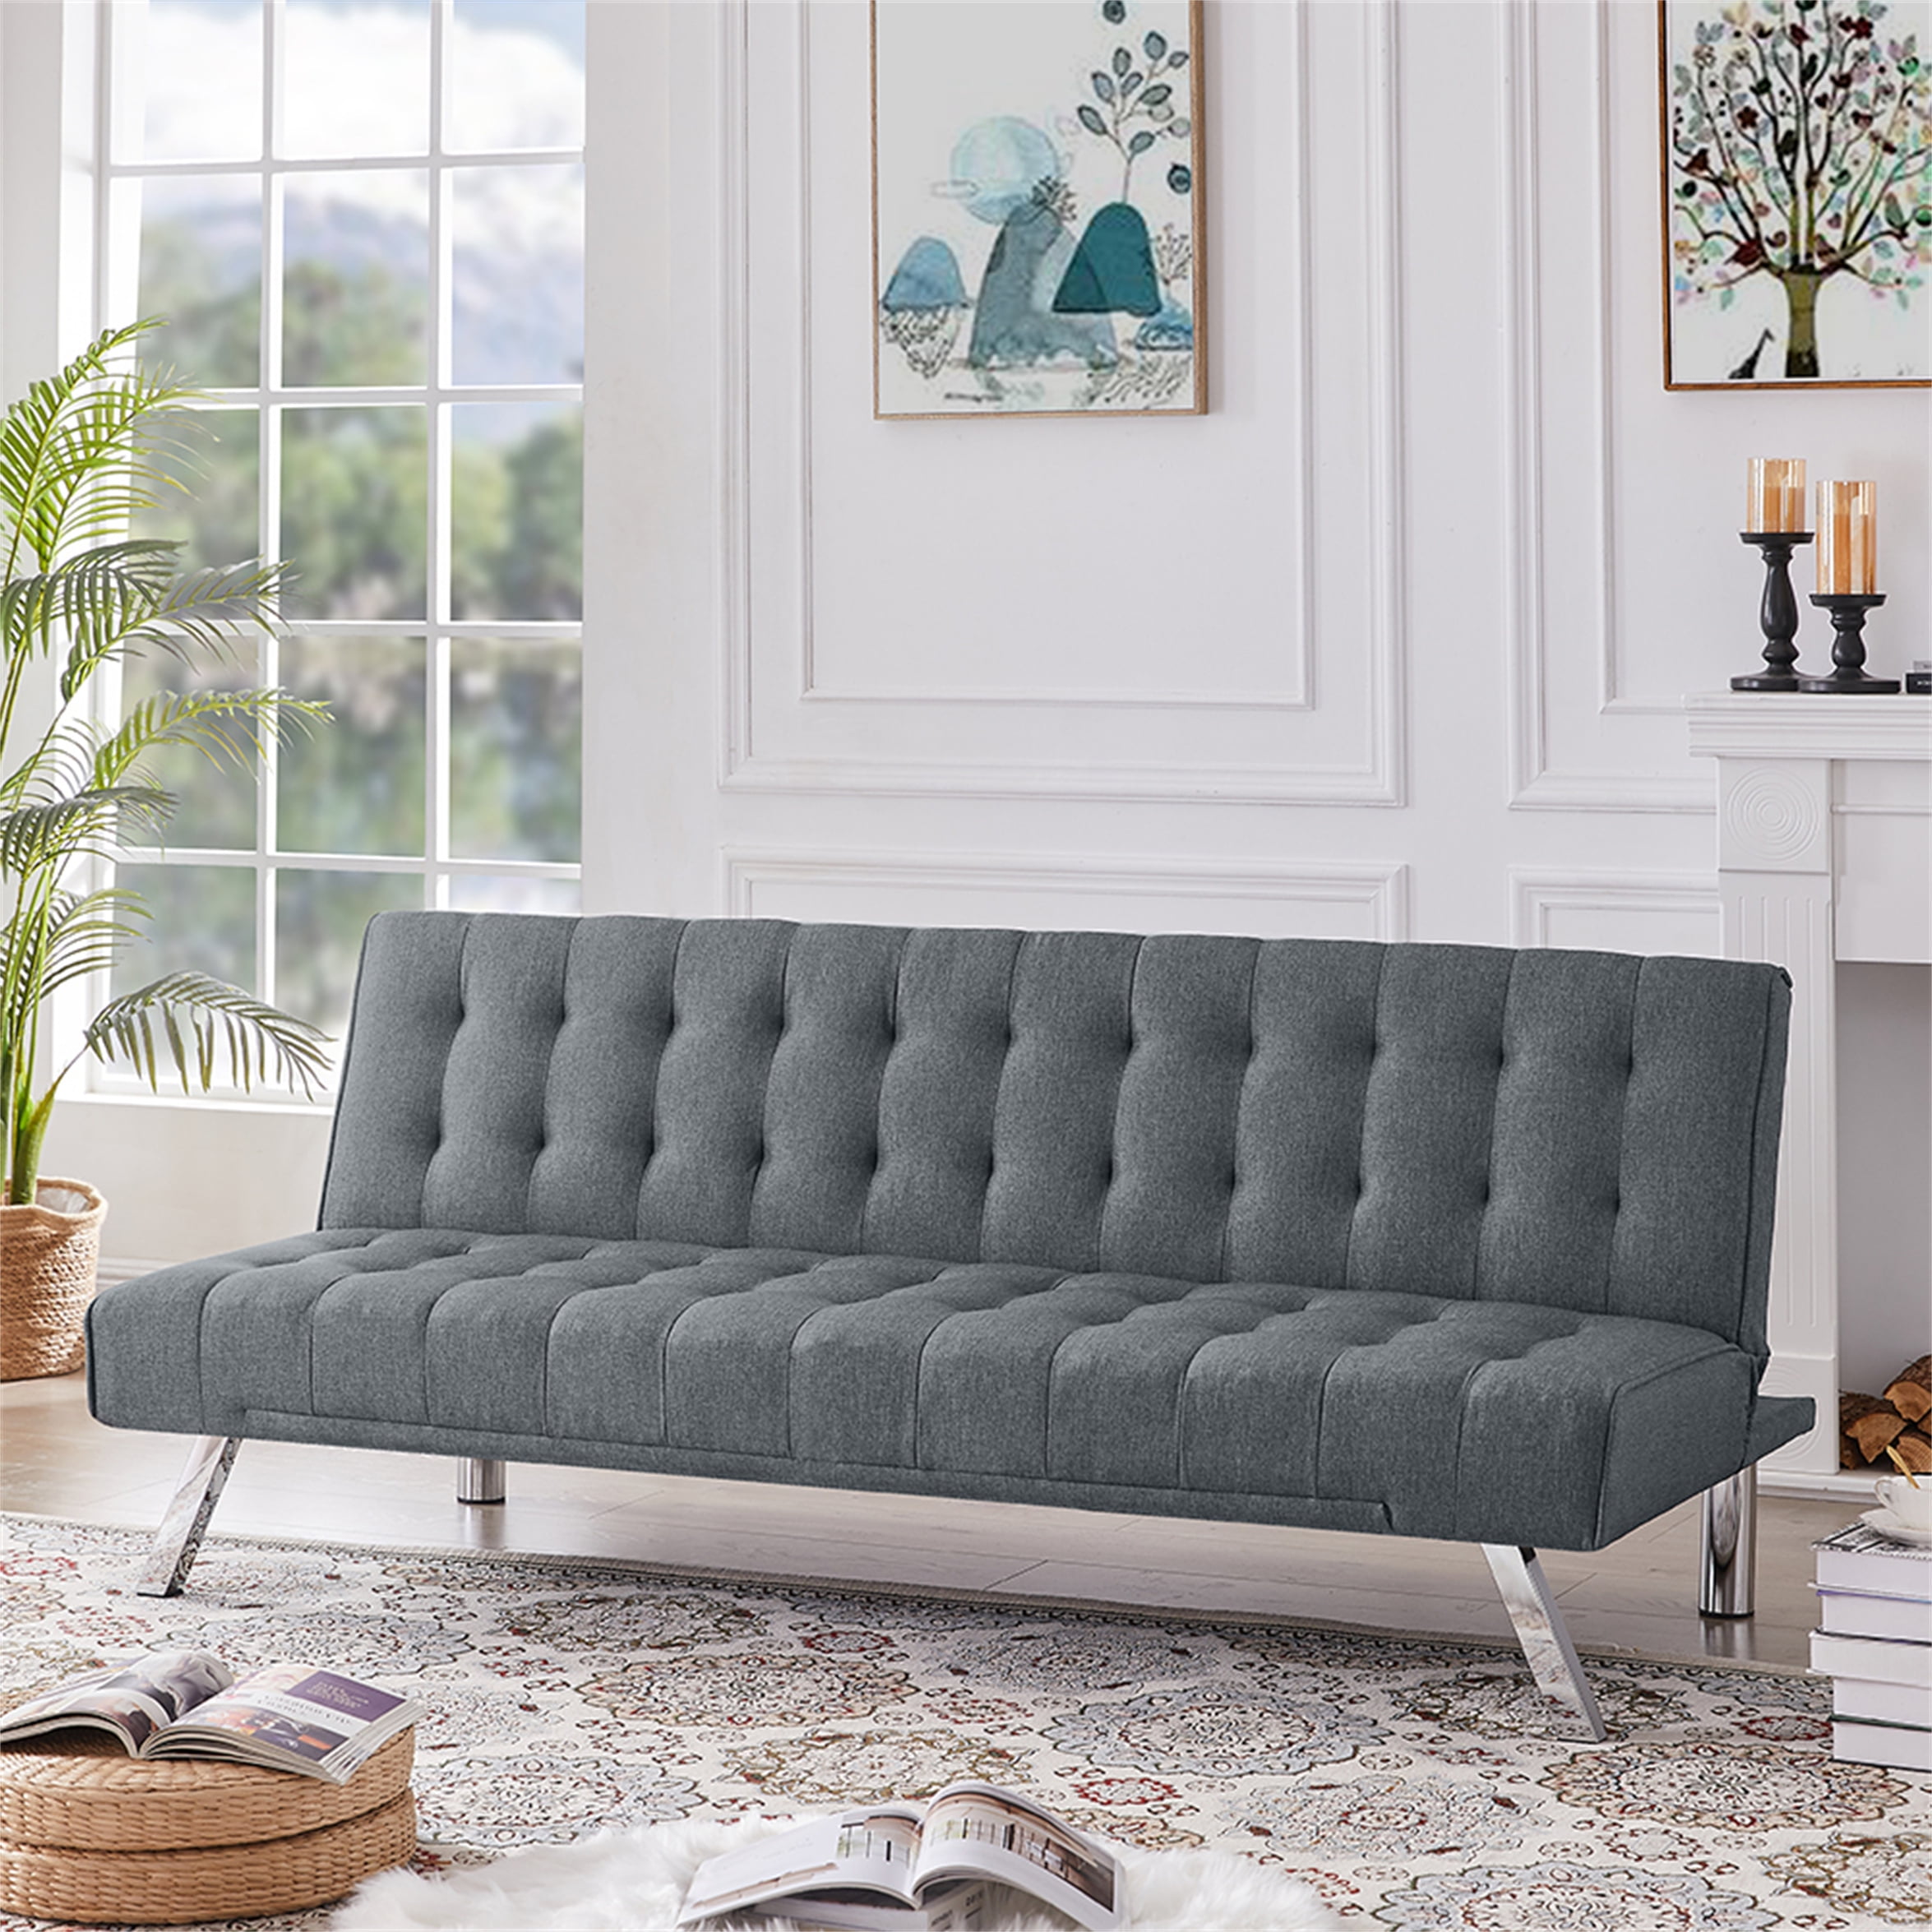 Modern Sofa Sleeper Design for Living Room or Bedroom Dark Grey Including Metal Legs and Linen Upholstery Sofabed Merax Futon Bed Couch